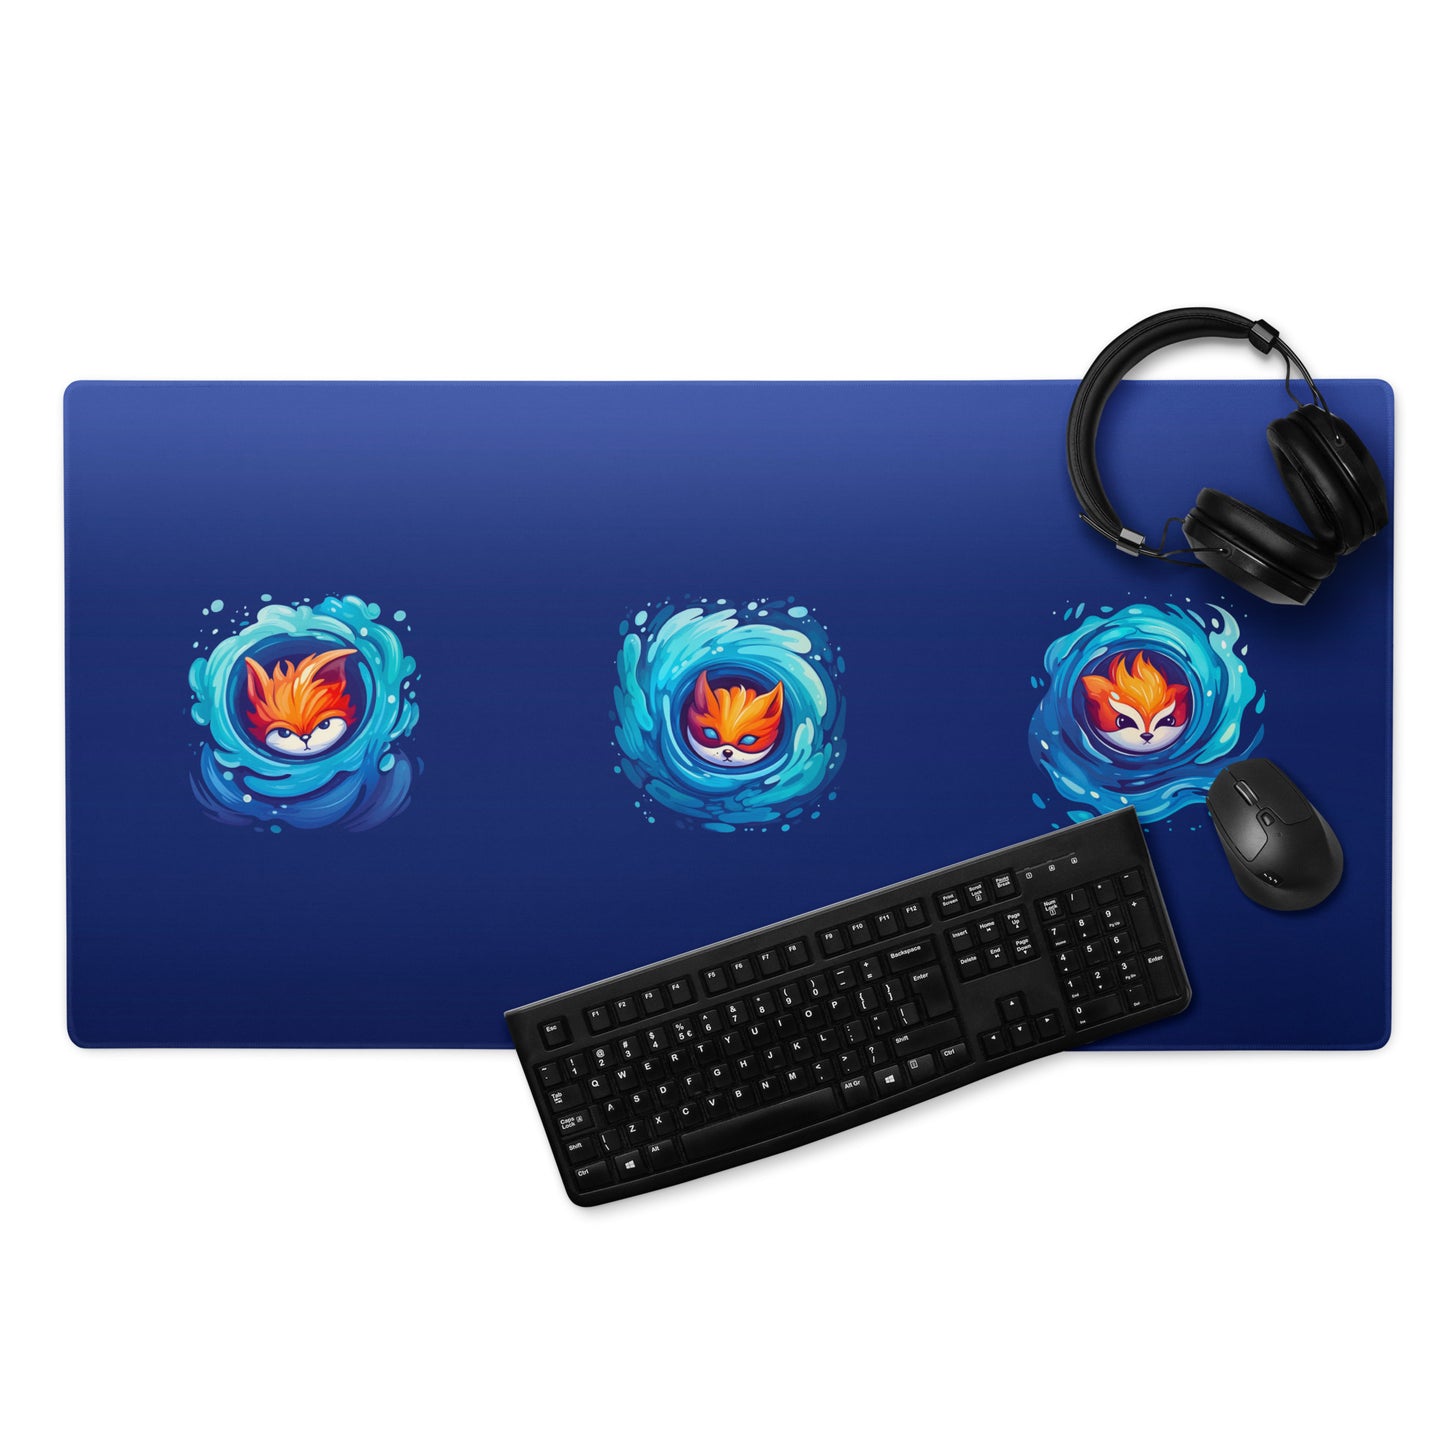 A 36" x 18" blue desk pad with three foxes in whirlpools. With a keyboard, mouse, and headphones sitting on it.